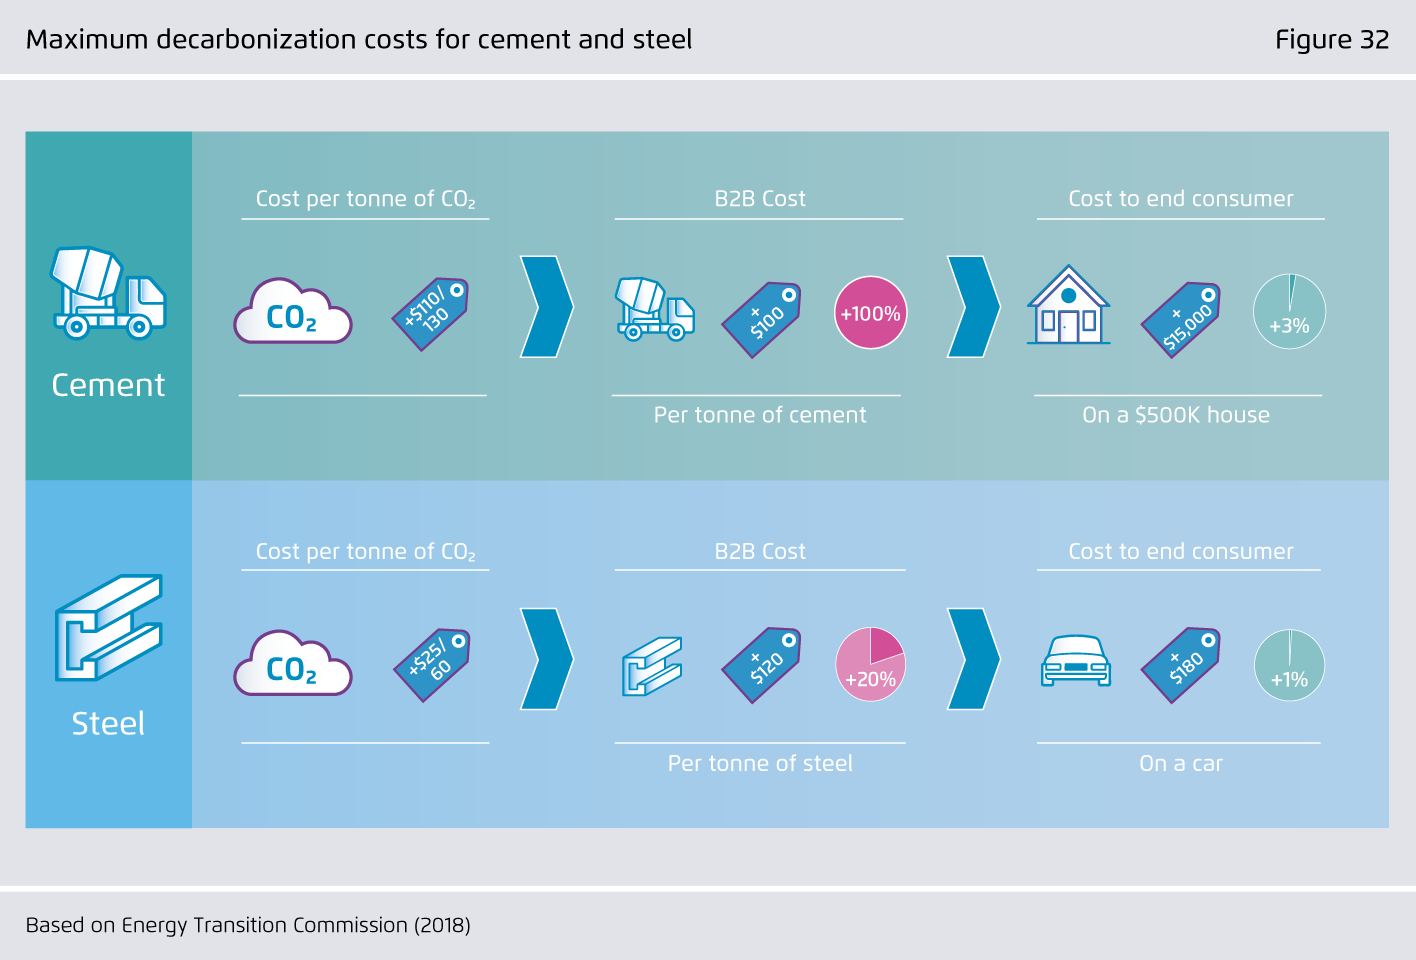 Preview for Maximum decarbonization costs for cement and steel